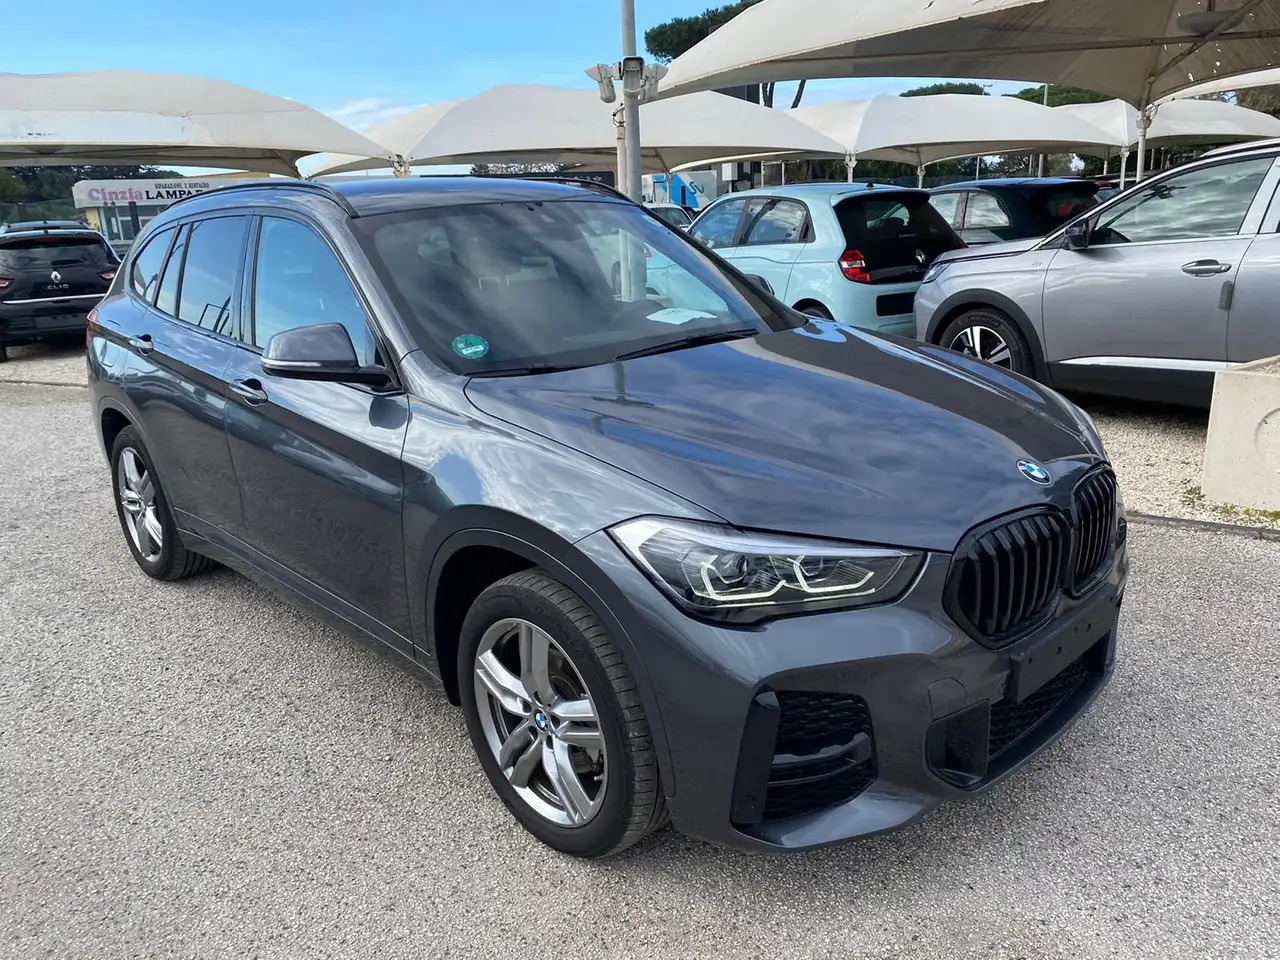 BMW X1 SUV/4x4/Pick-up in Grijs demo in Ciampino voor € 28.900,-